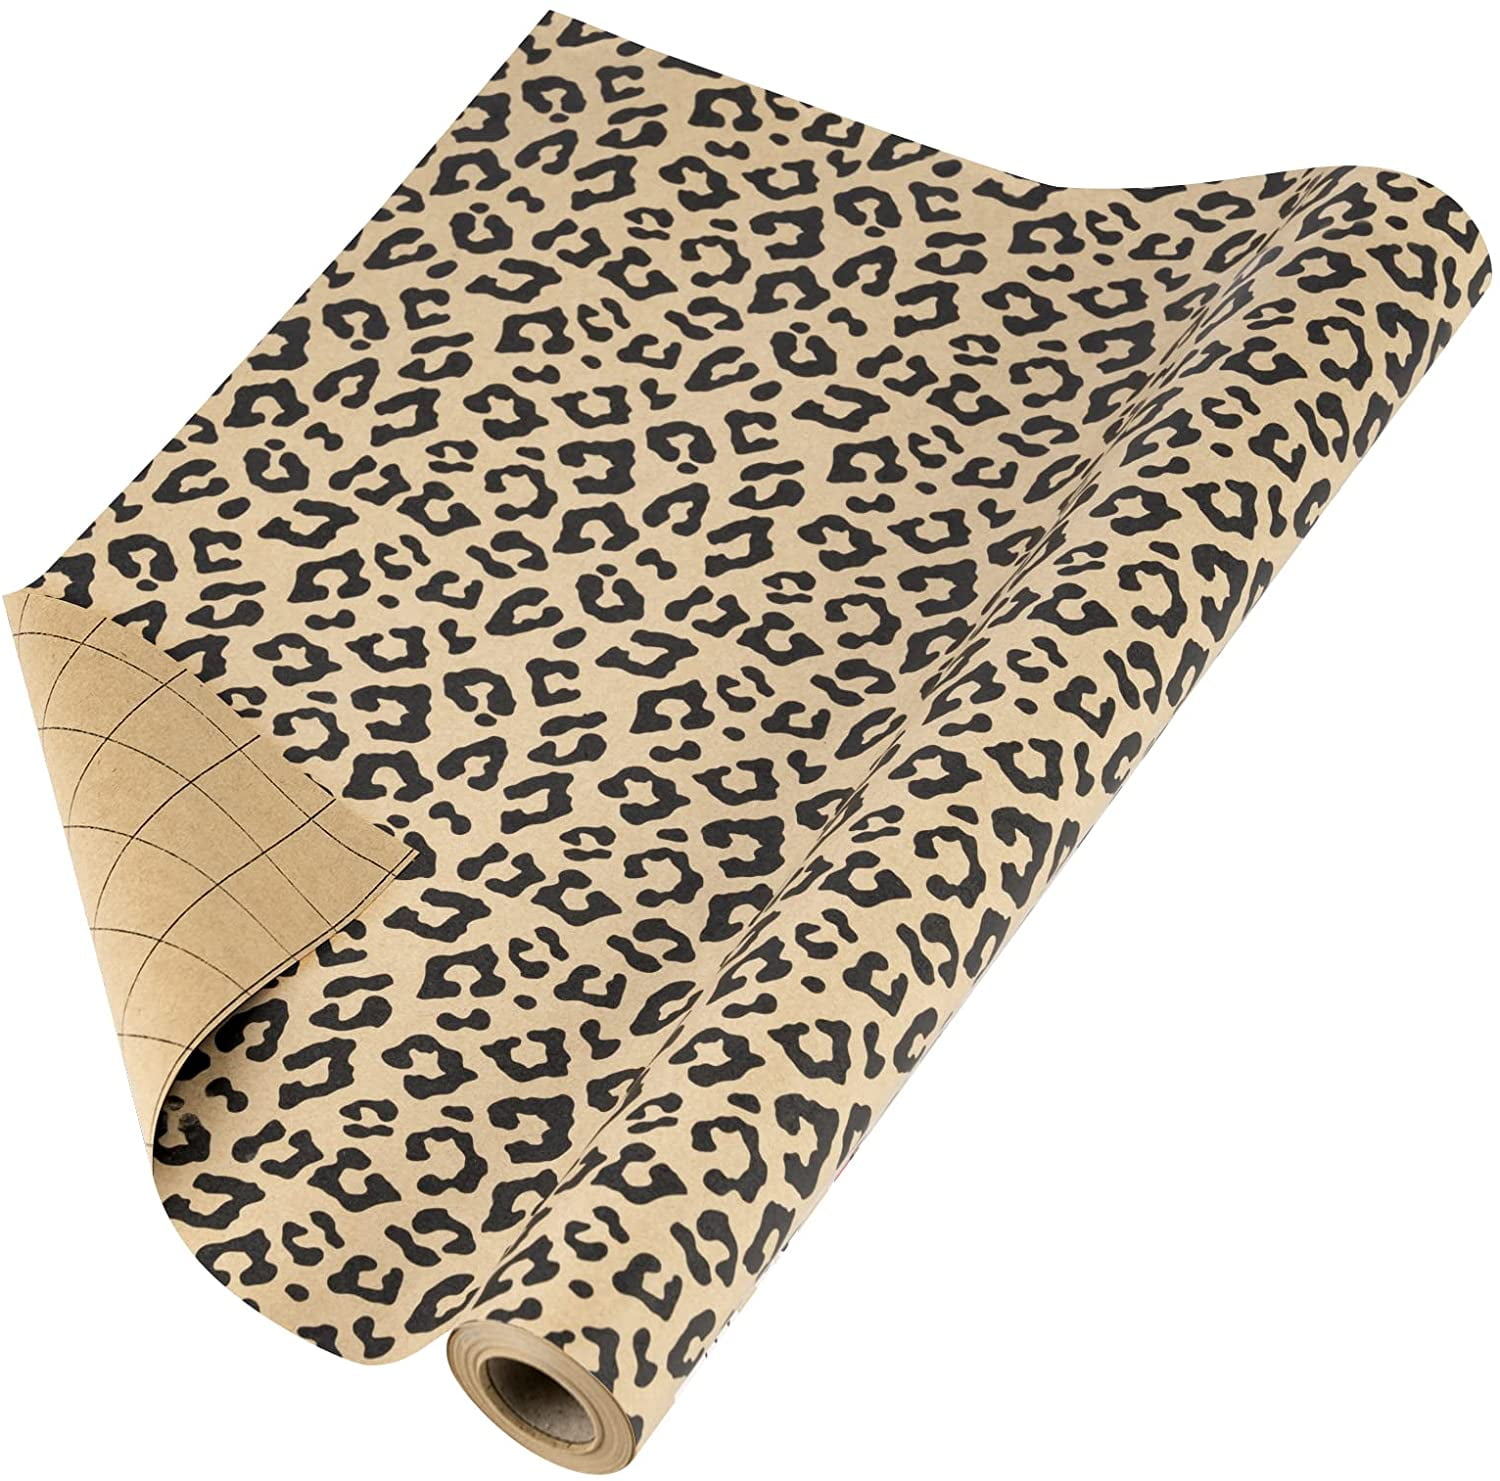 Blank Large Wrapping Paper Roll (5 x 30)-Fancy Leopard Print